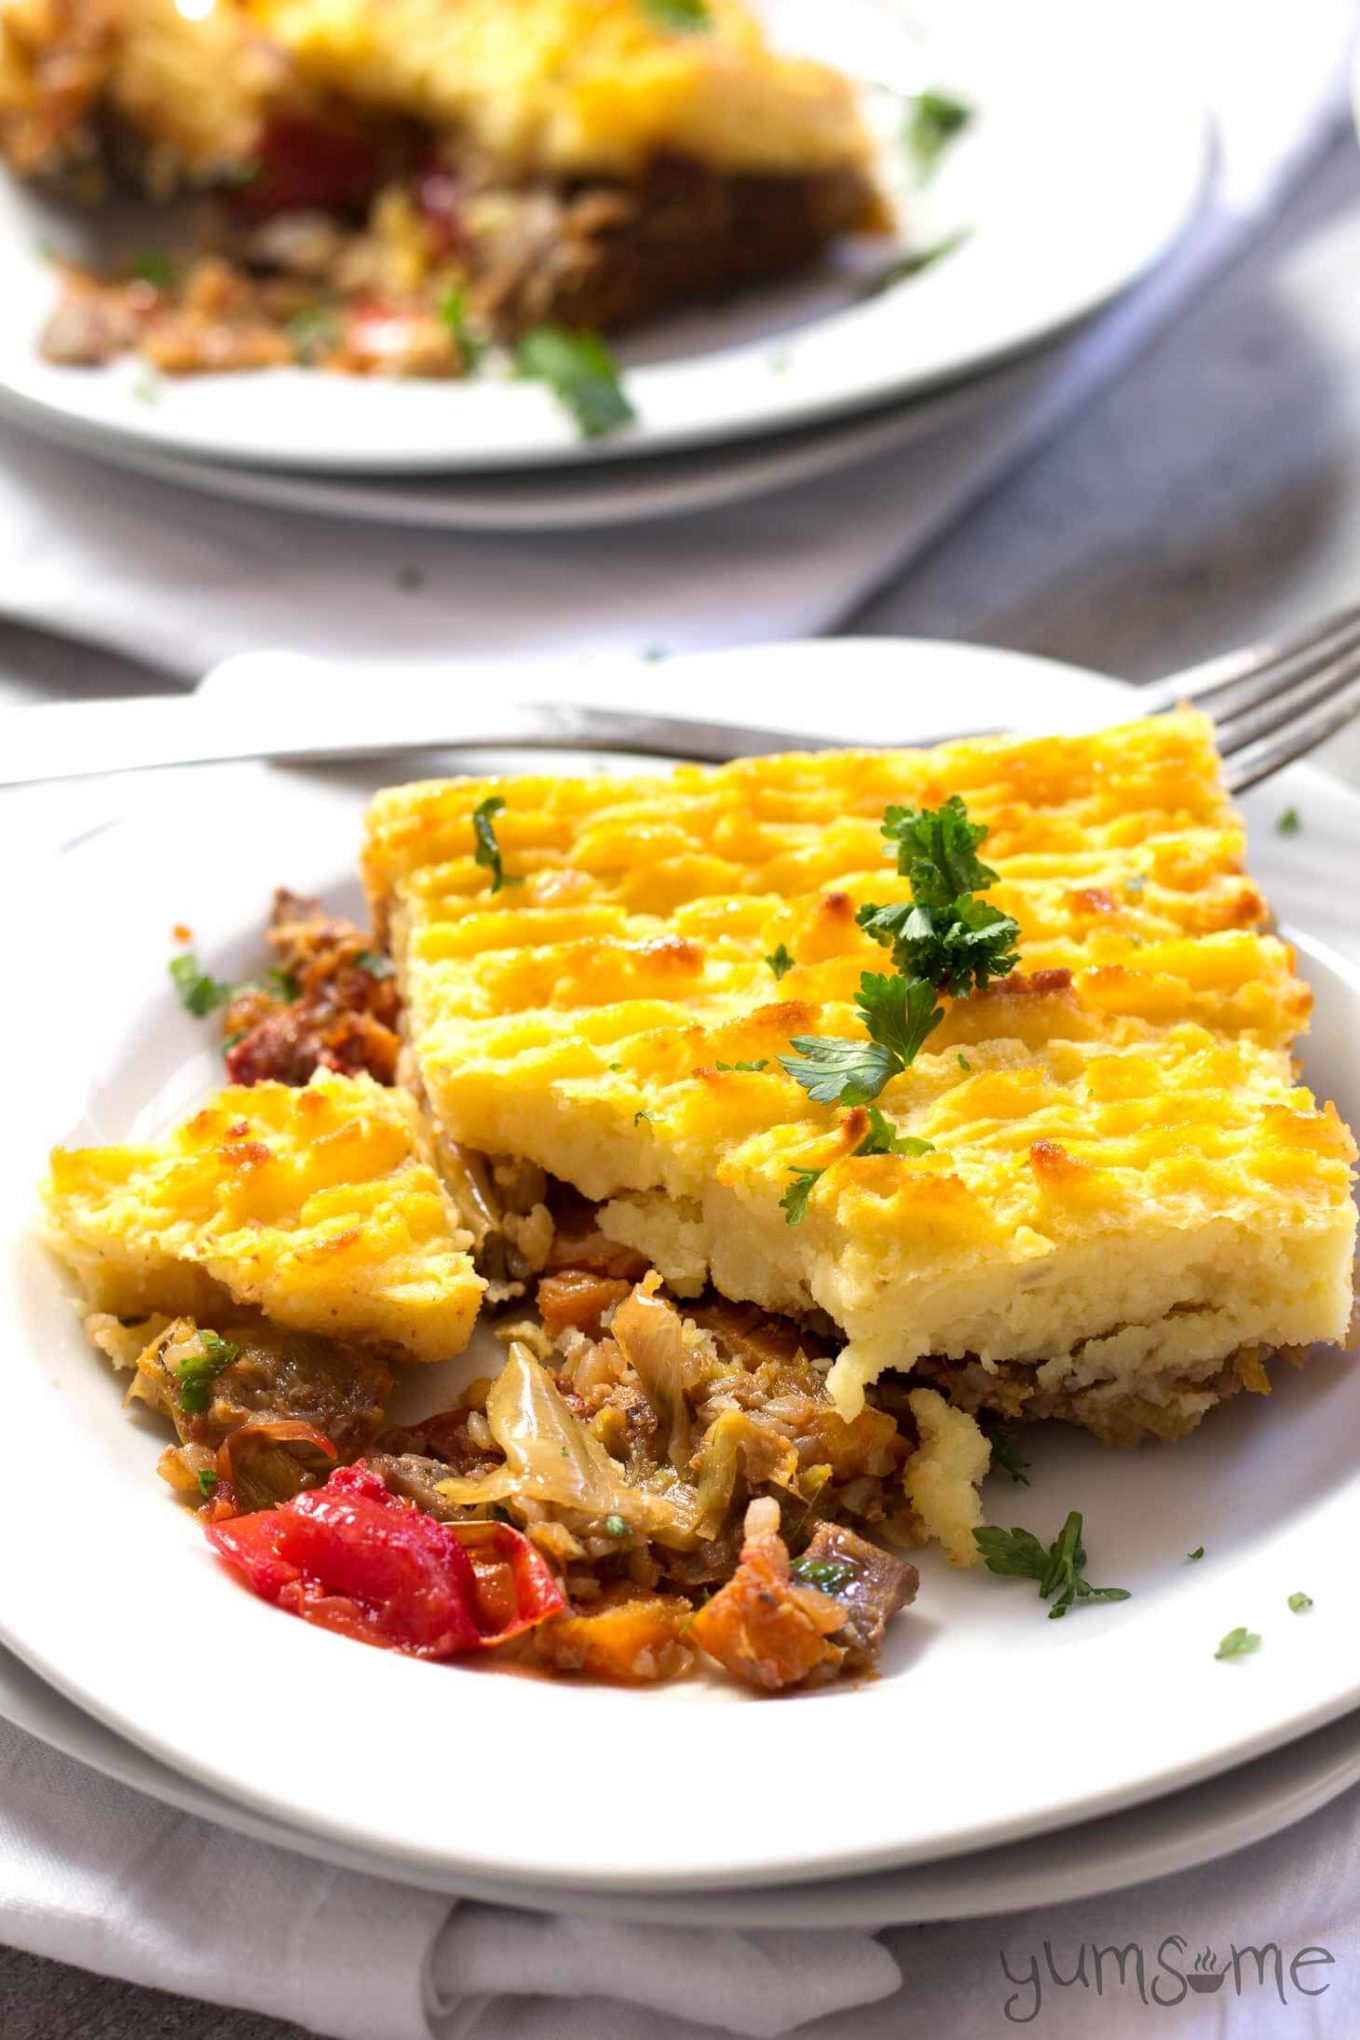 Hearty vegetables and nourishing buckwheat, topped with a layer of crisped creamy mashed potato, make my vegan mushroom and buckwheat shepherd’s pie a deliciously comforting, filling, and very frugal autumn dish. It’s so delicious, you won’t miss the meat! | yumsome.com